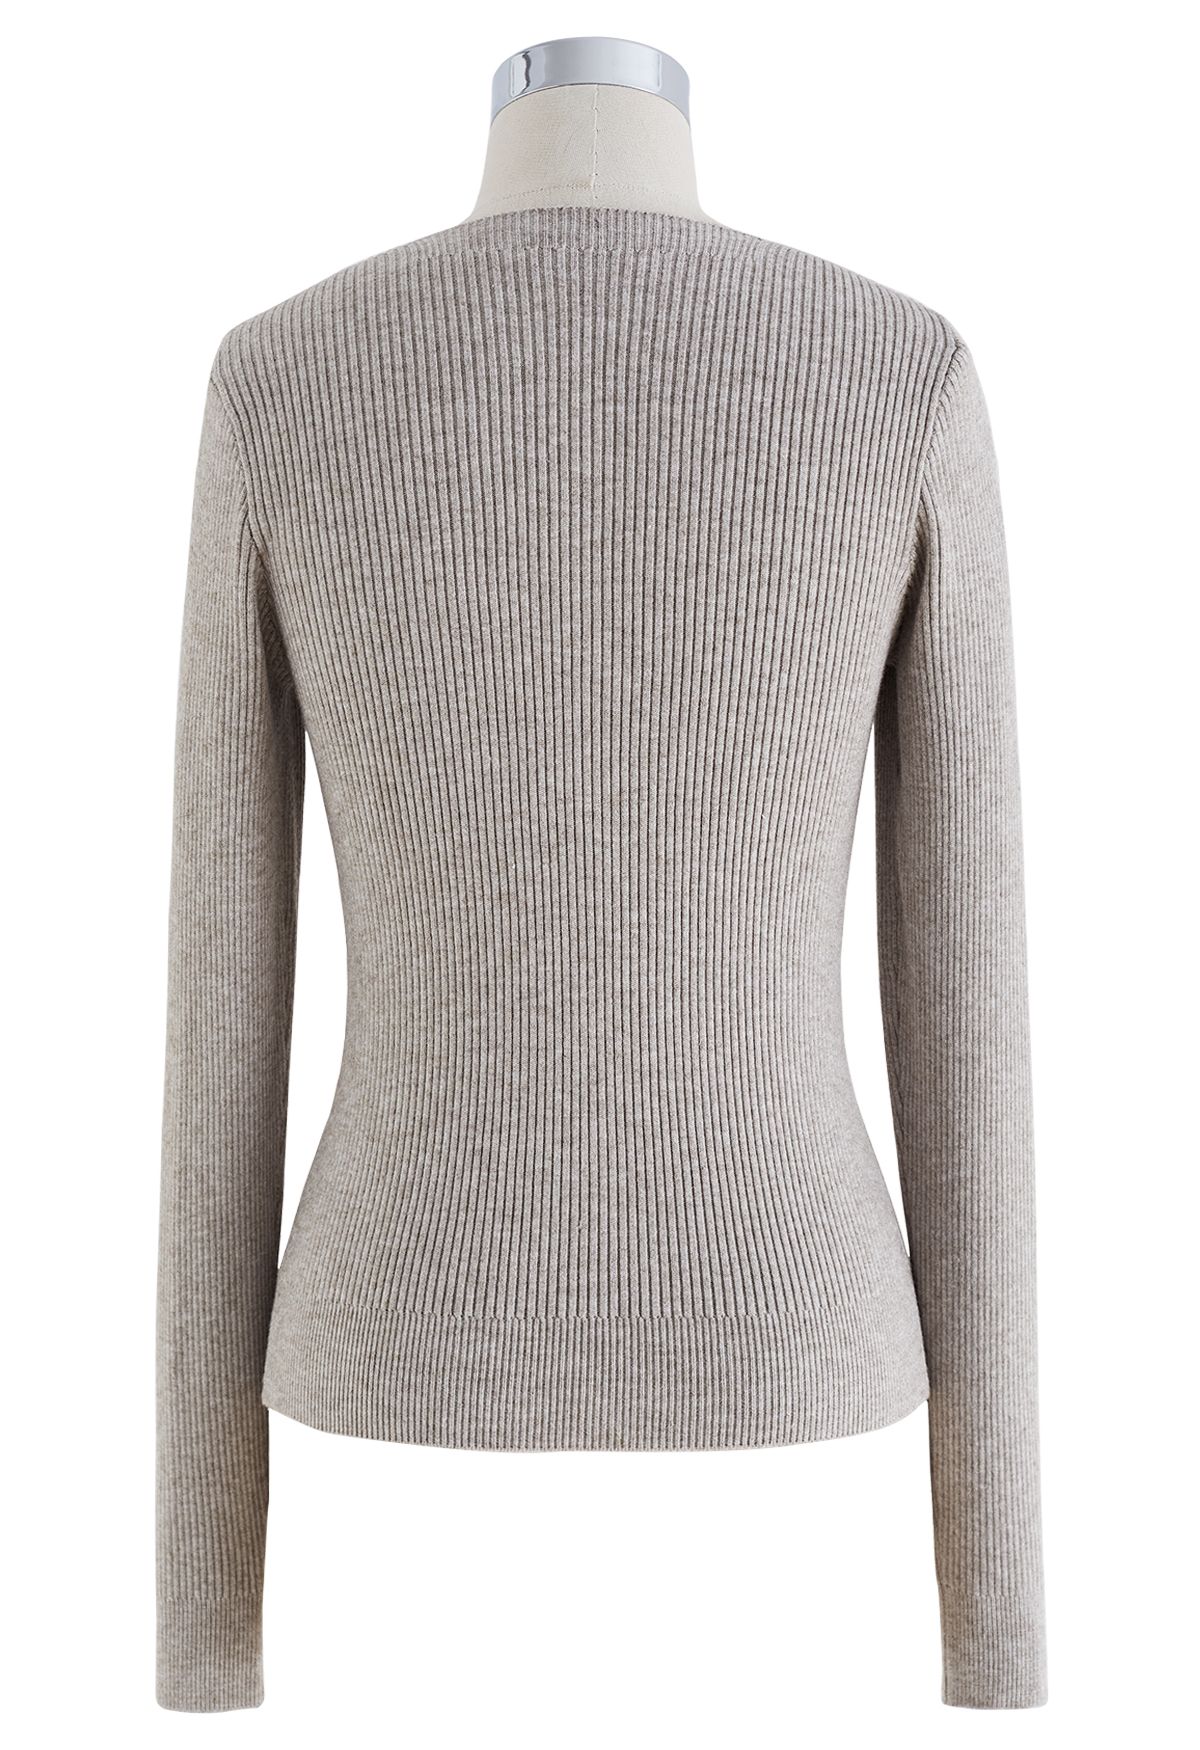 Sweetheart Twist Front Ribbed Knit Top in Linen - Retro, Indie and ...